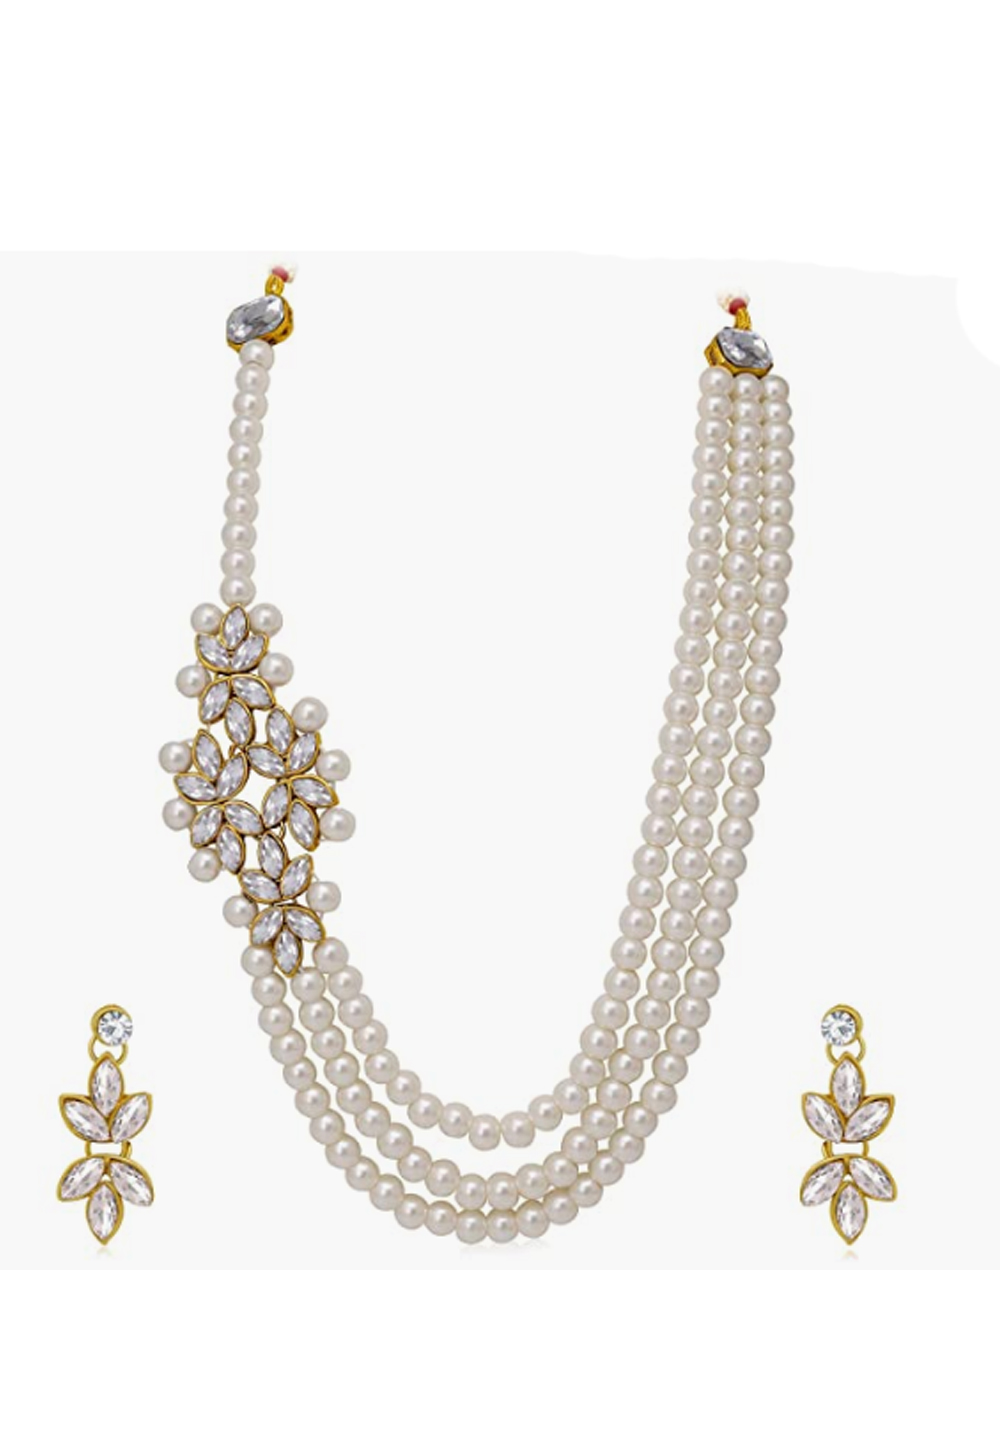 Off White Alloy Austrian Diamonds And Kundan Necklace Set With Earrings 260969